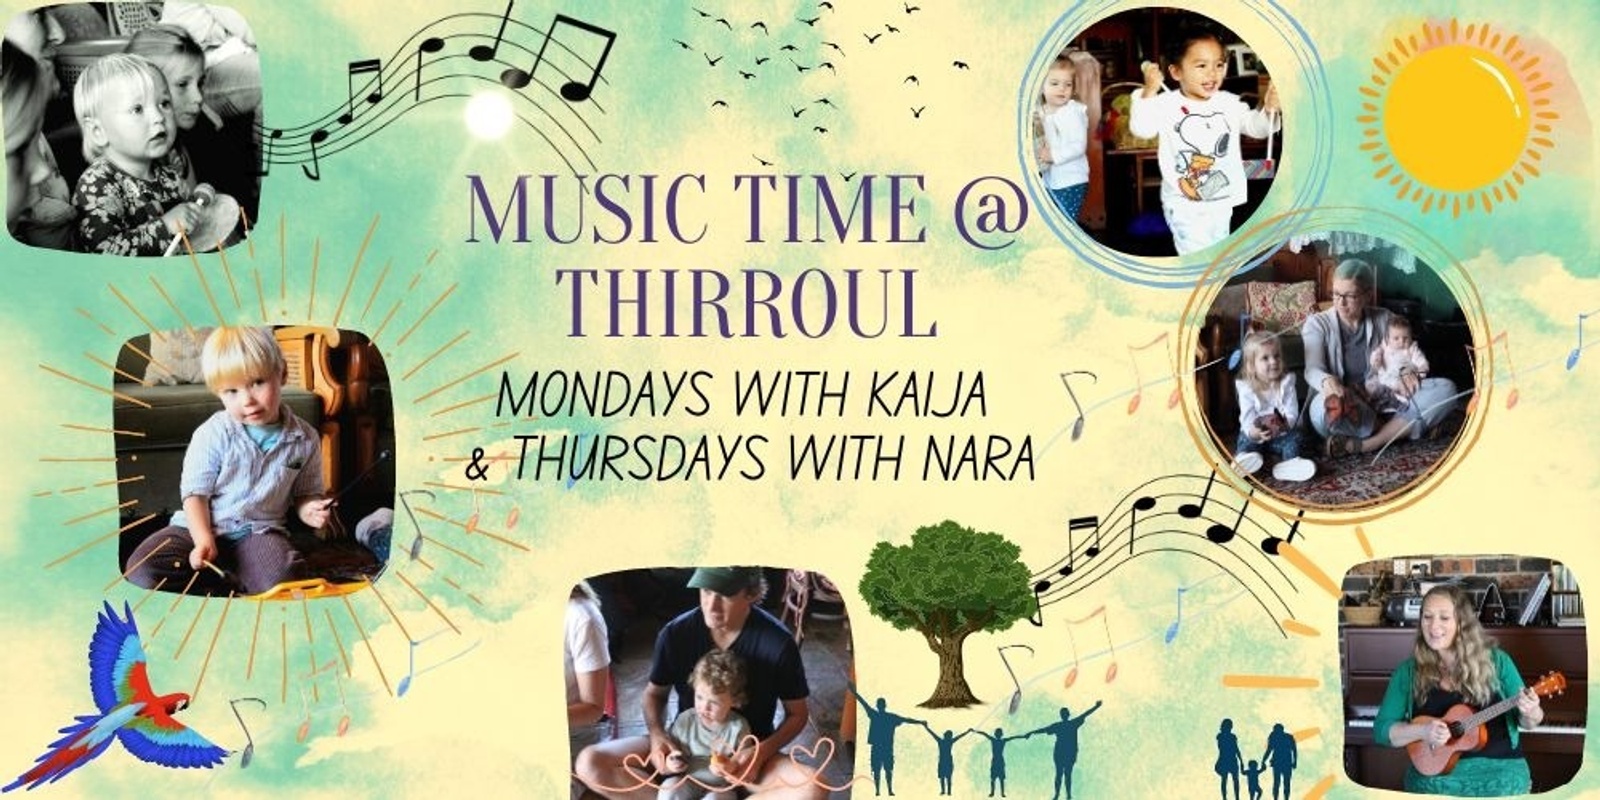 Banner image for Music Time @ Thirroul Monday 9.30